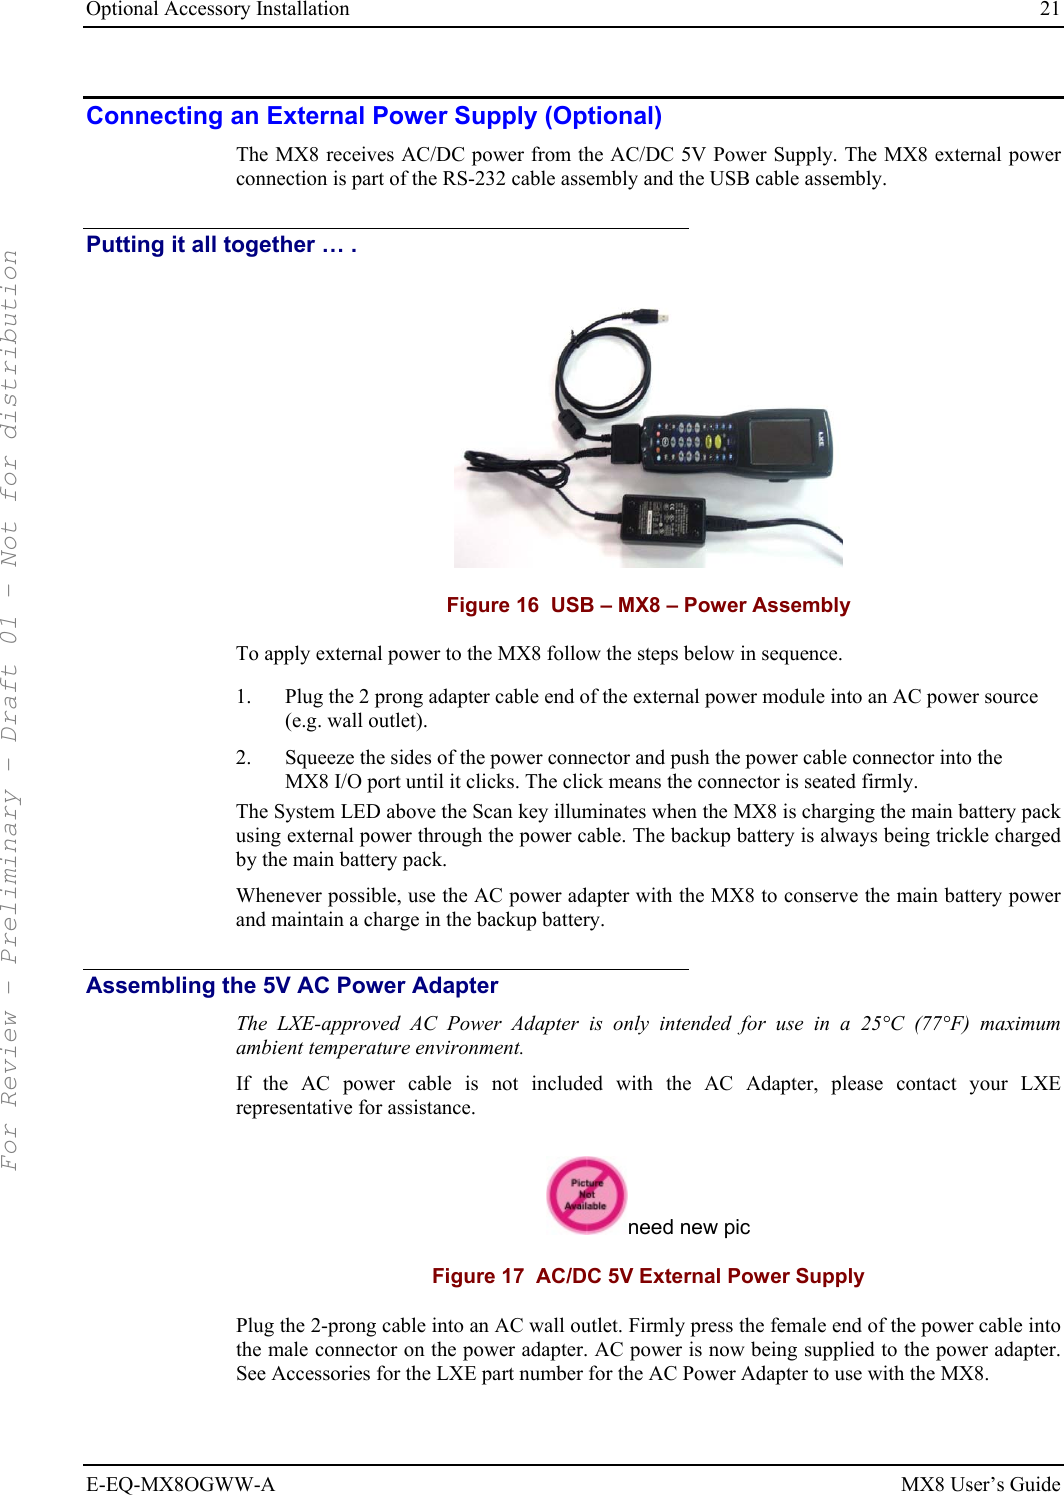 Optional Accessory Installation  21 E-EQ-MX8OGWW-A MX8 User’s Guide Connecting an External Power Supply (Optional) The MX8 receives AC/DC power from the AC/DC 5V Power Supply. The MX8 external power connection is part of the RS-232 cable assembly and the USB cable assembly.  Putting it all together … .  Figure 16  USB – MX8 – Power Assembly To apply external power to the MX8 follow the steps below in sequence. 1.  Plug the 2 prong adapter cable end of the external power module into an AC power source (e.g. wall outlet). 2.  Squeeze the sides of the power connector and push the power cable connector into the MX8 I/O port until it clicks. The click means the connector is seated firmly. The System LED above the Scan key illuminates when the MX8 is charging the main battery pack using external power through the power cable. The backup battery is always being trickle charged by the main battery pack. Whenever possible, use the AC power adapter with the MX8 to conserve the main battery power and maintain a charge in the backup battery. Assembling the 5V AC Power Adapter The LXE-approved AC Power Adapter is only intended for use in a 25°C (77°F) maximum ambient temperature environment. If the AC power cable is not included with the AC Adapter, please contact your LXE representative for assistance.  need new pic Figure 17  AC/DC 5V External Power Supply Plug the 2-prong cable into an AC wall outlet. Firmly press the female end of the power cable into the male connector on the power adapter. AC power is now being supplied to the power adapter. See Accessories for the LXE part number for the AC Power Adapter to use with the MX8. For Review - Preliminary - Draft 01 - Not for distribution 